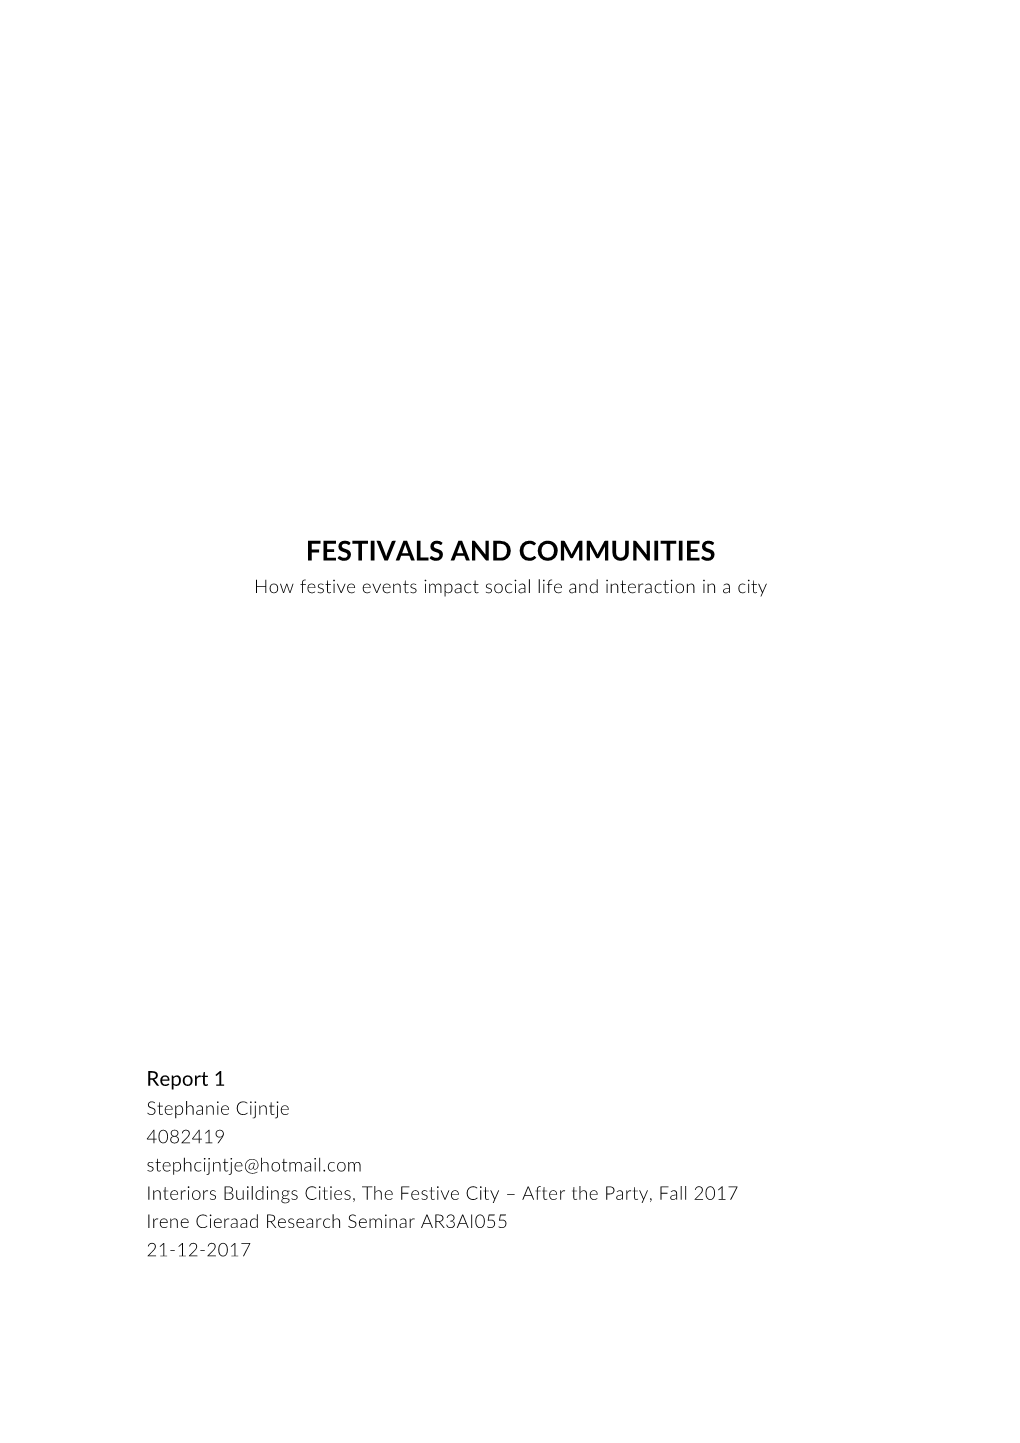 FESTIVALS and COMMUNITIES How Festive Events Impact Social Life and Interaction in a City